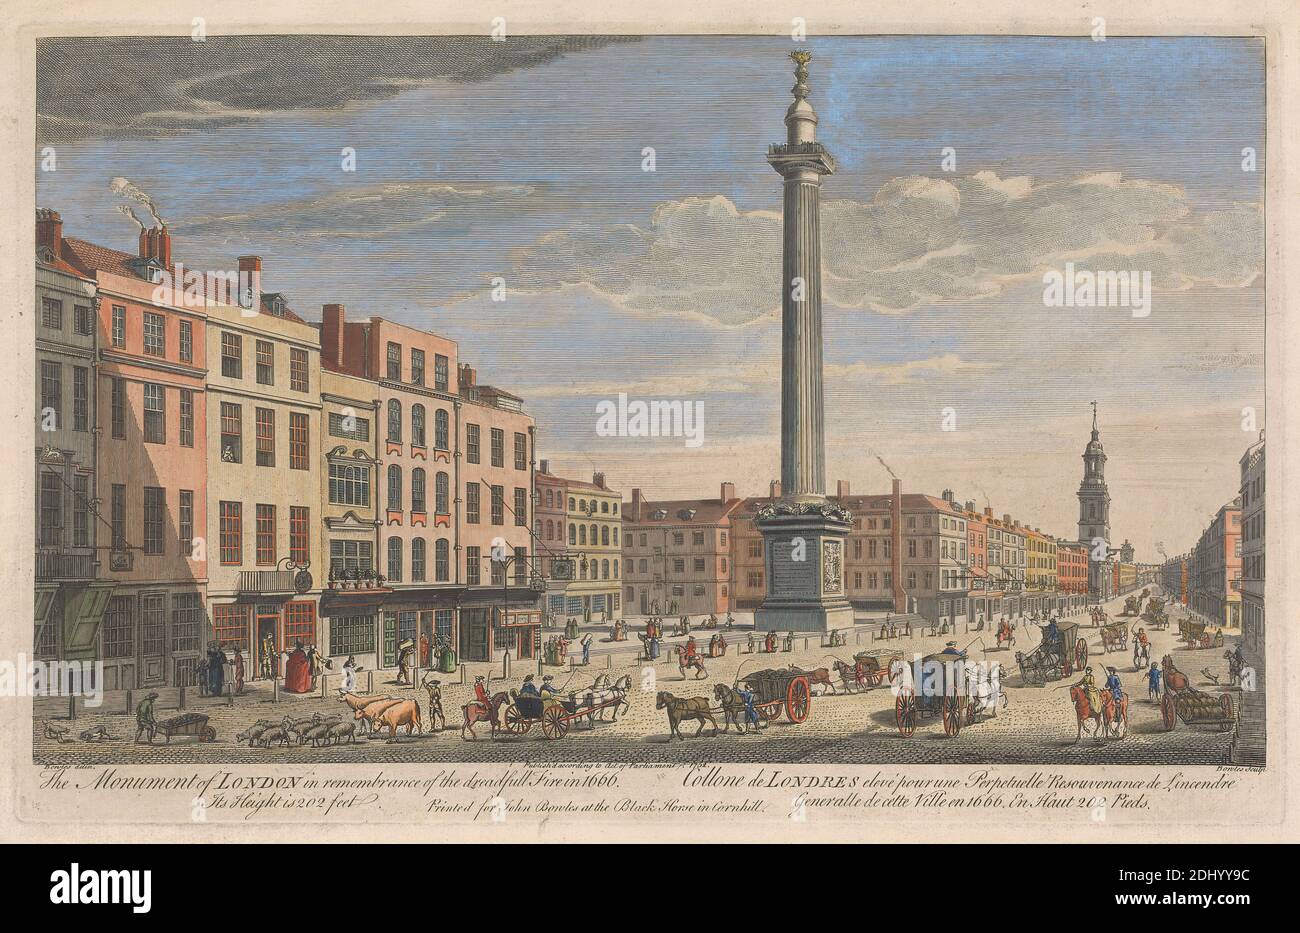 The Monument of London in Remembrance of the Dreadful Fire in 1666, Thomas Bowles, ca. 1712–died 1753, British, after Thomas Bowles, ca. 1712–died 1753, British, 1752, Hand colored engraving Stock Photo